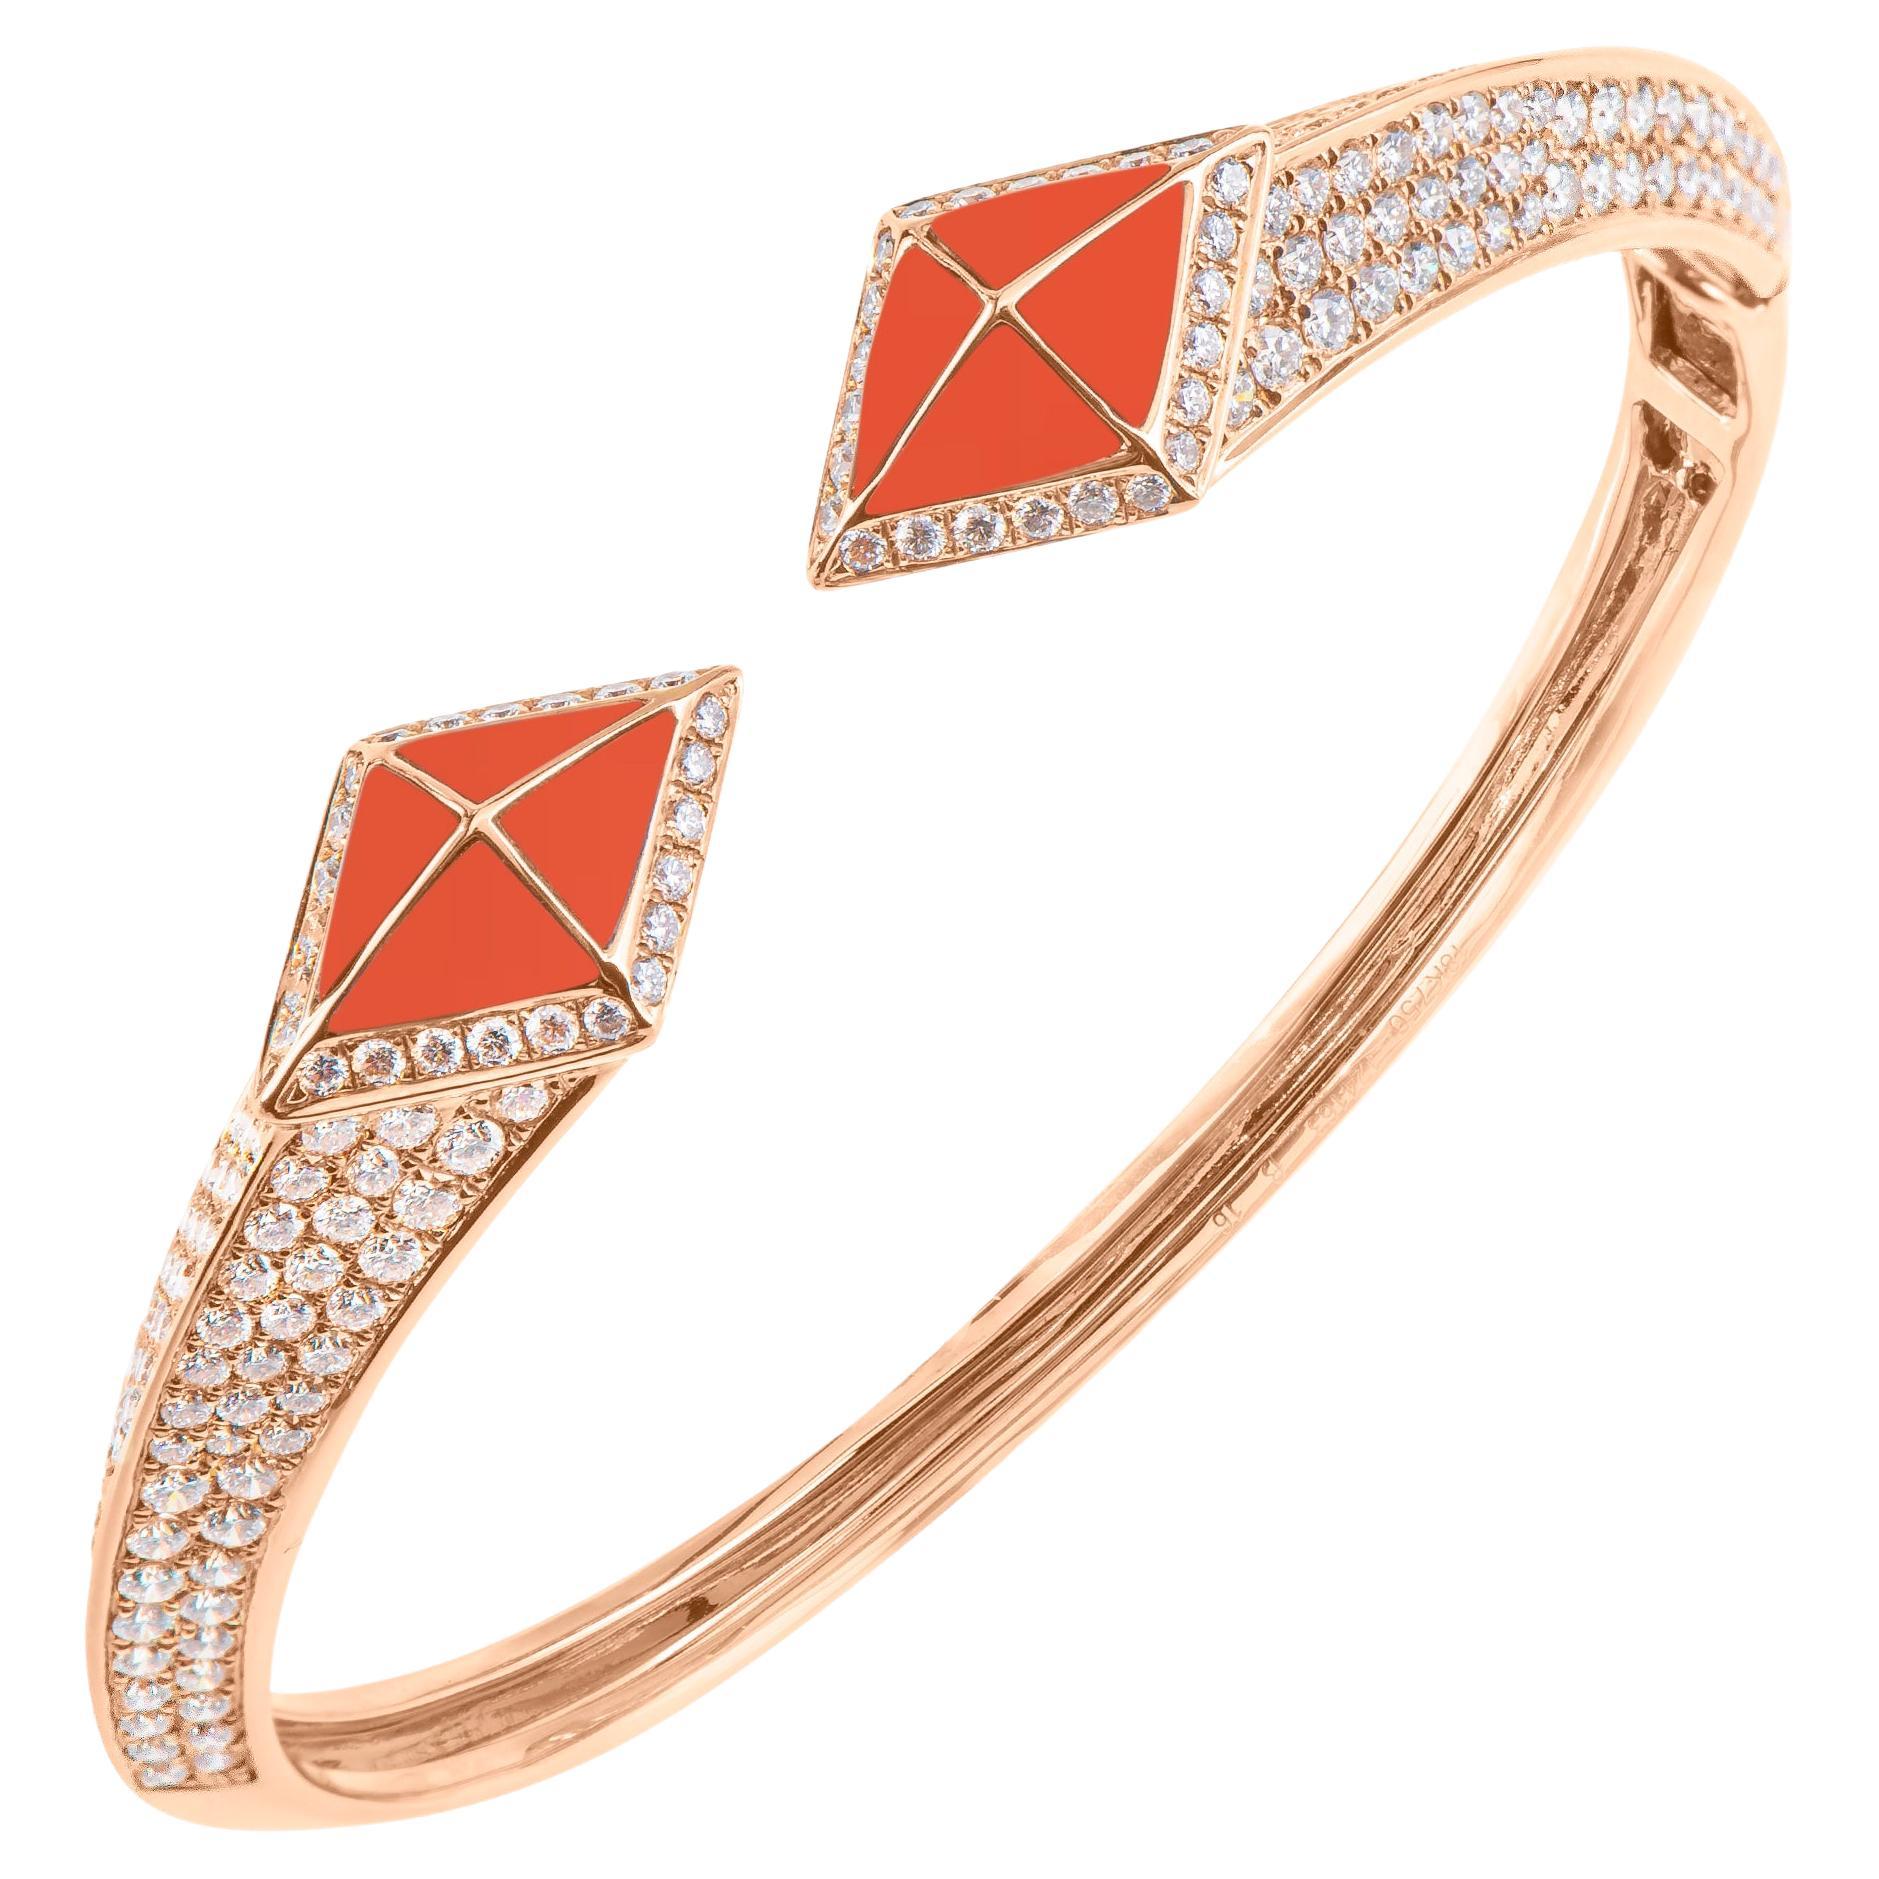 Tetra Hydra Bangle with Orange Coral and Diamonds in 18k Rose Gold